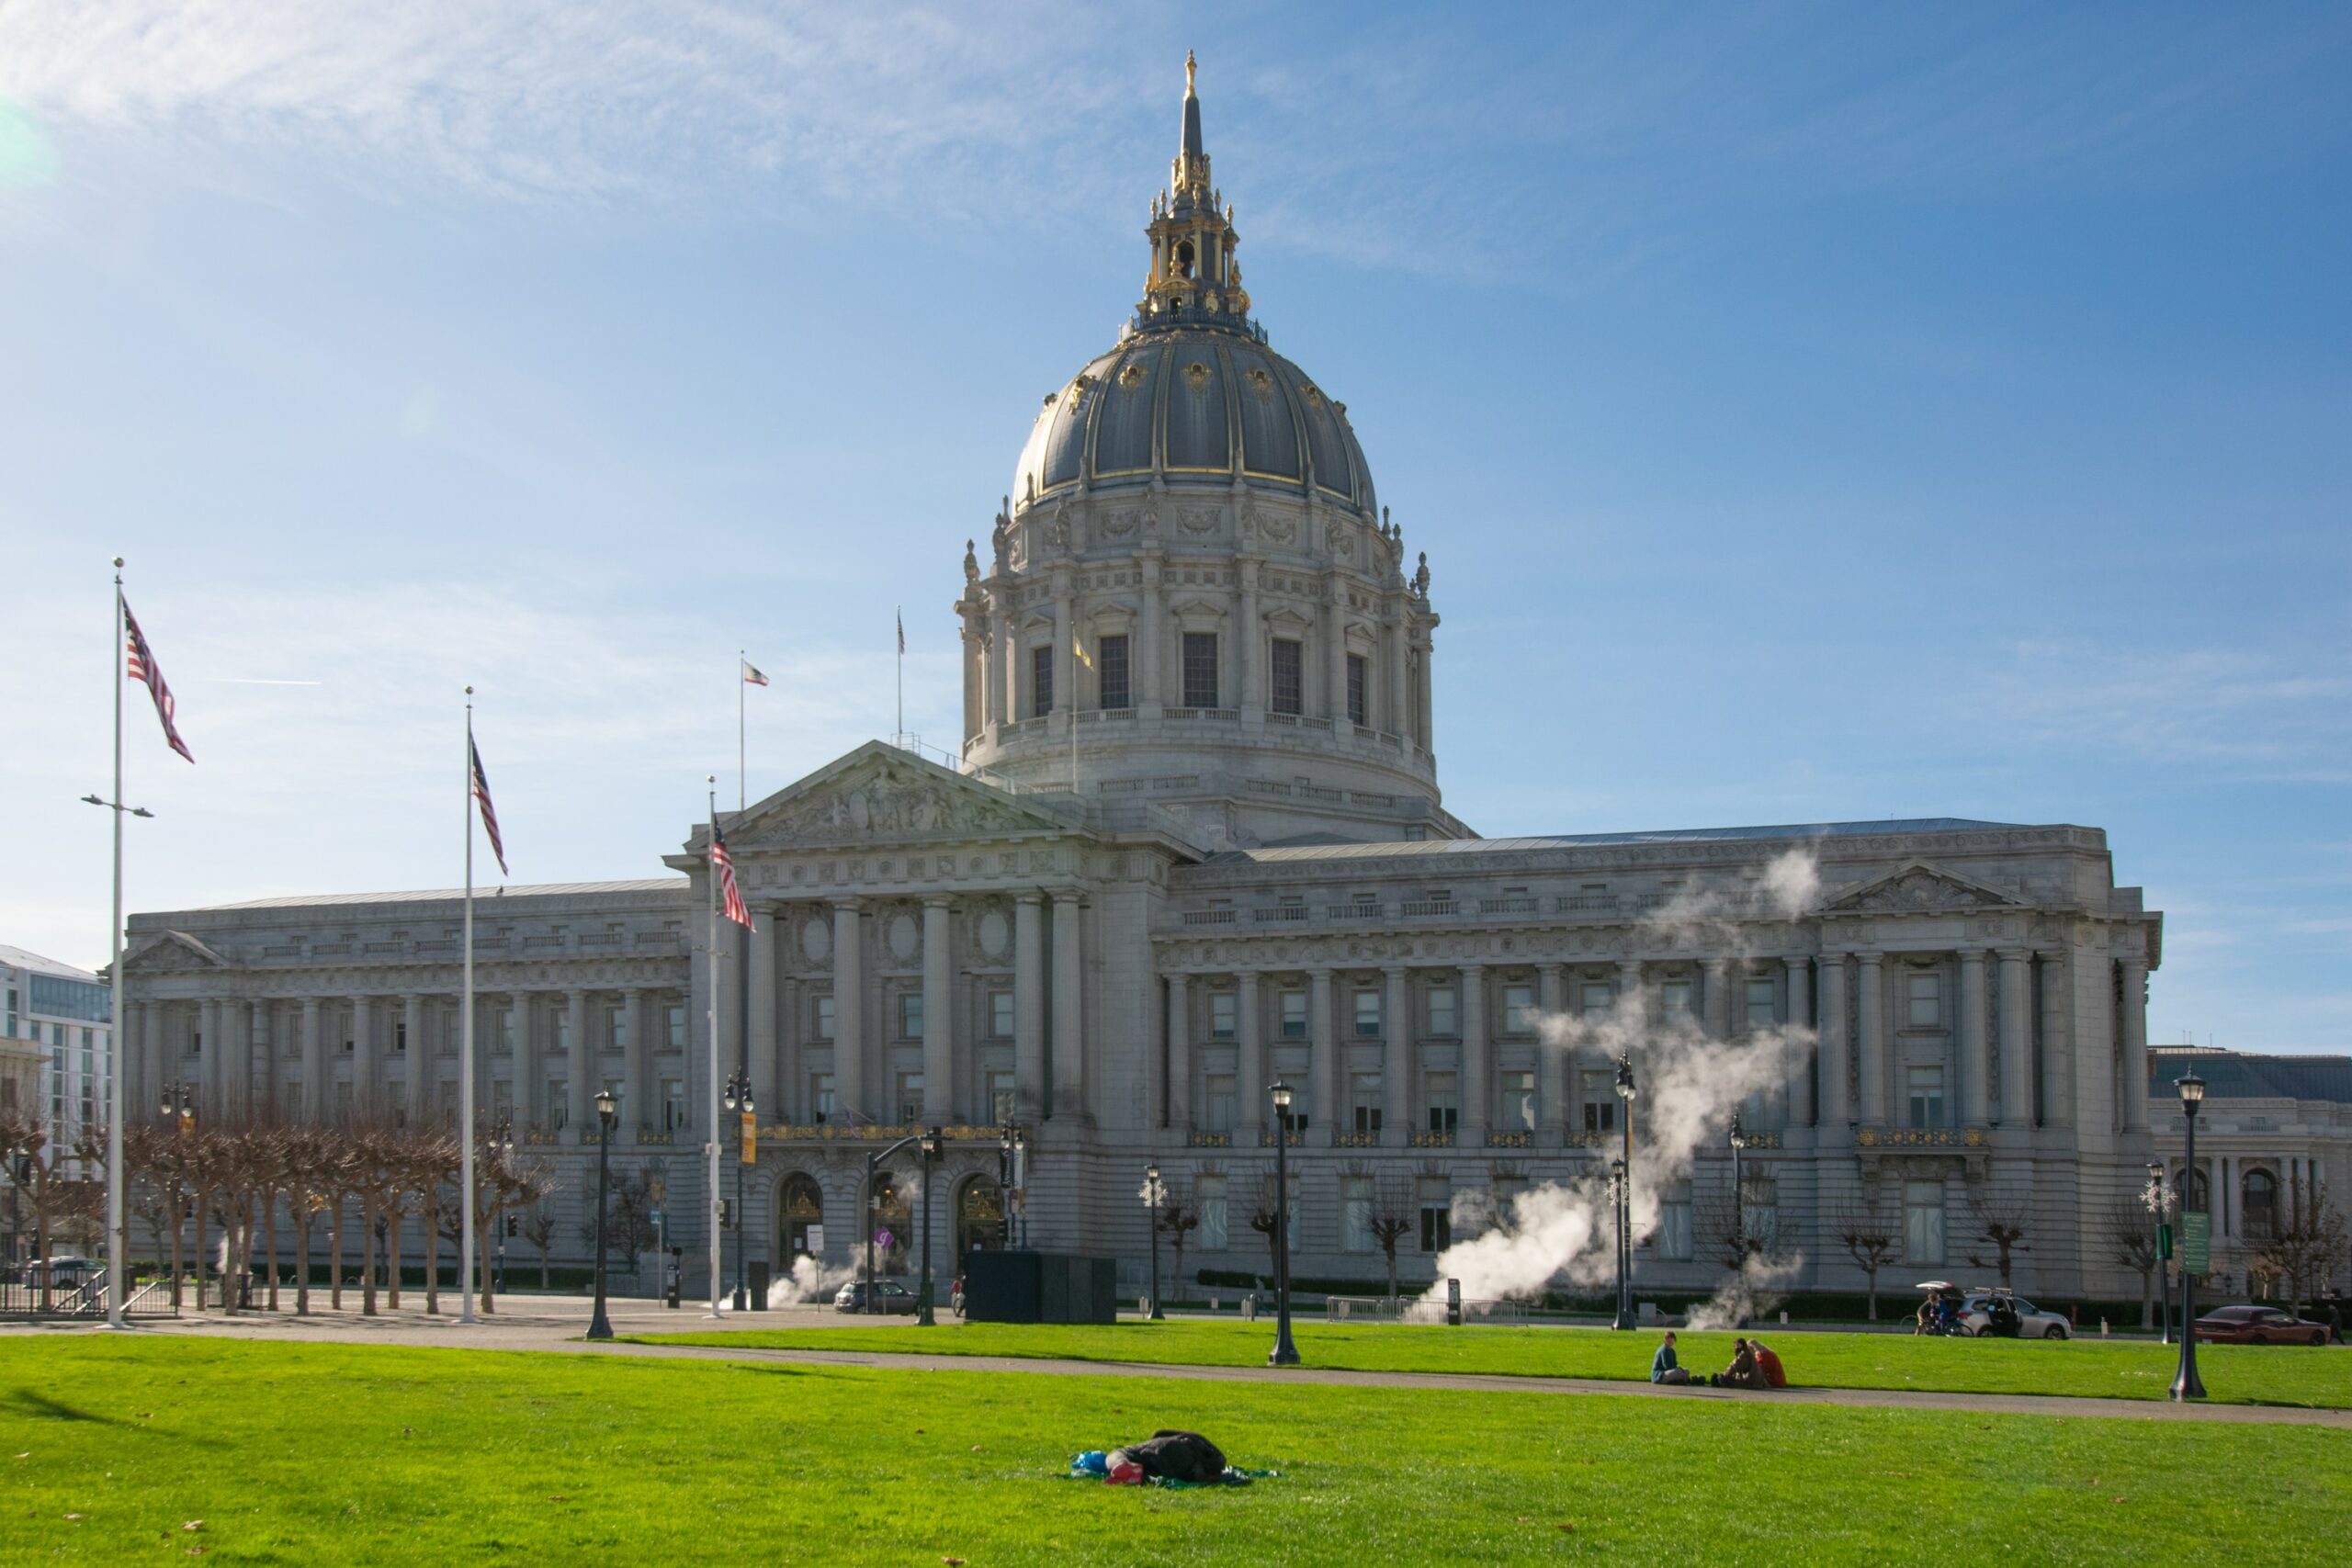 San Francisco Chronicle: “Faced with ‘builder’s remedy’ threat, S.F. supes advance housing development legislation”